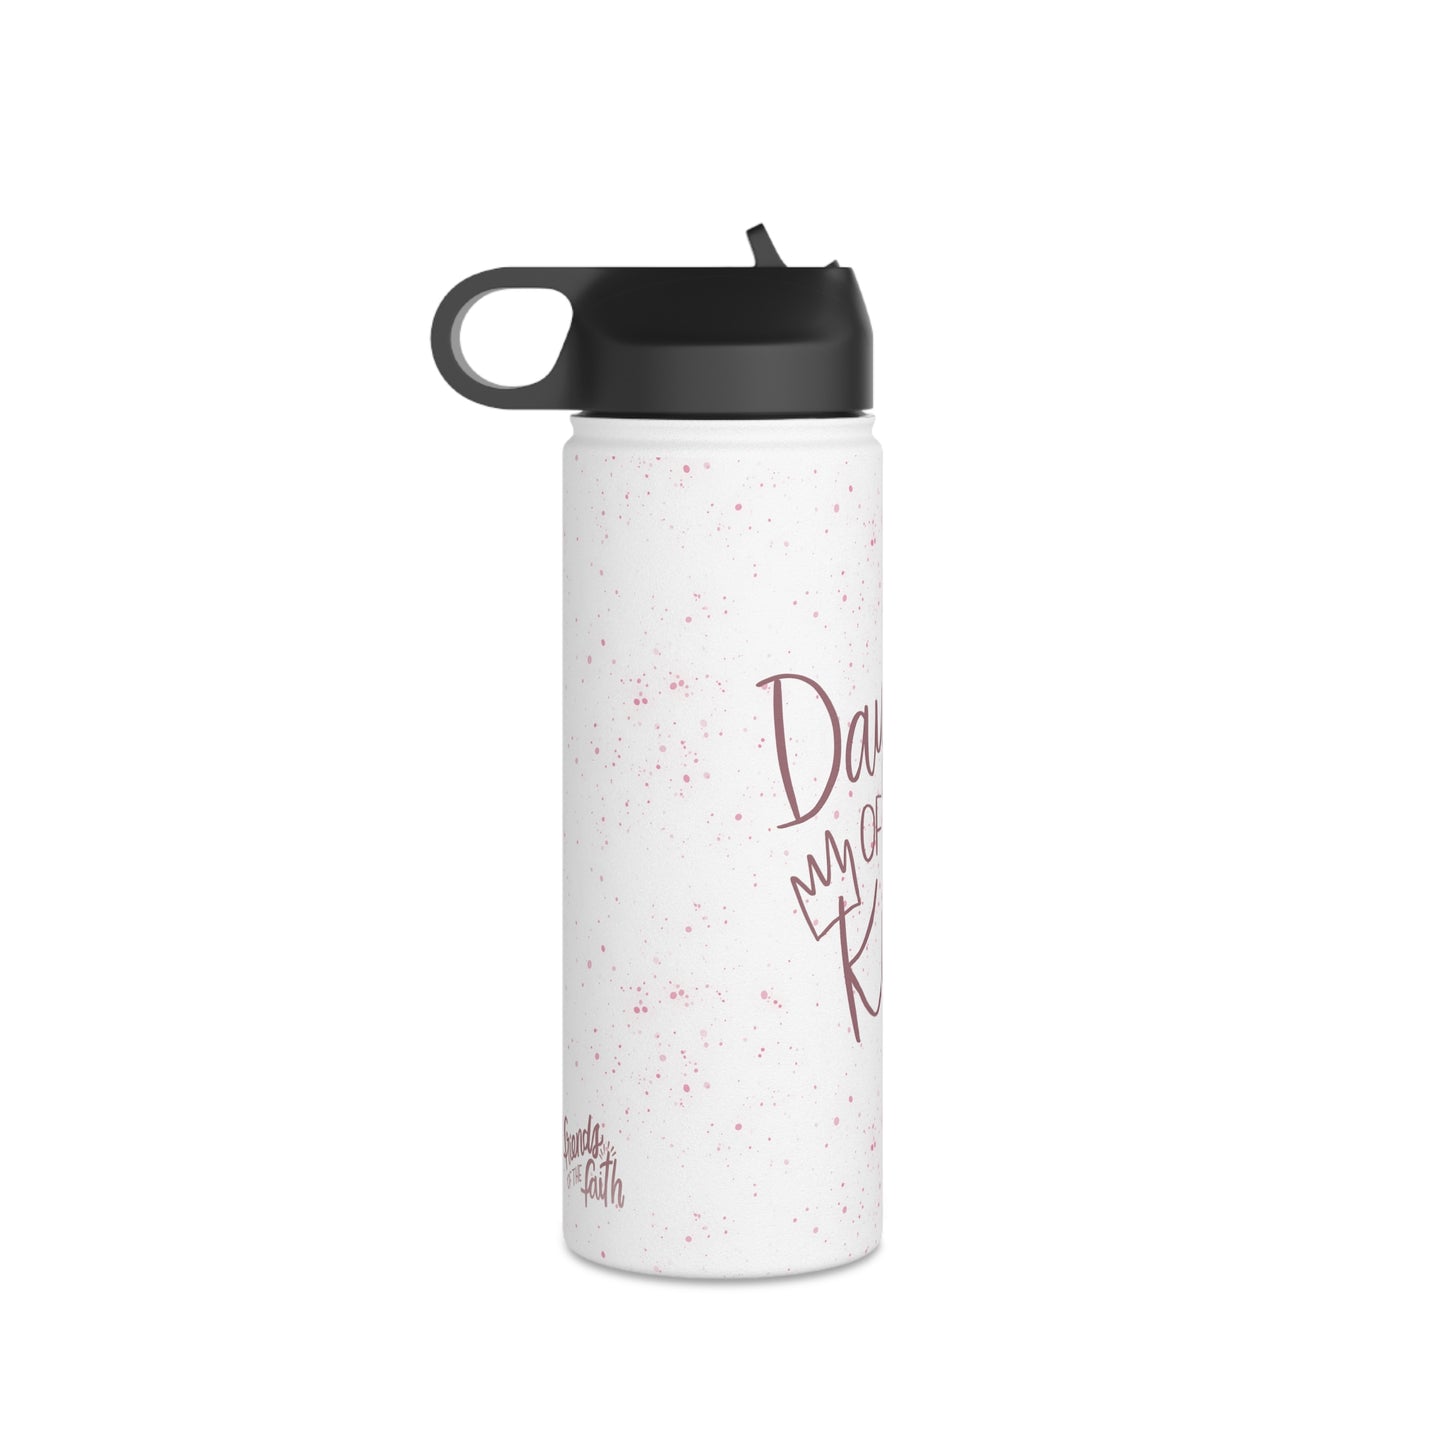 Daughter of the King Stainless Steel Water Bottle